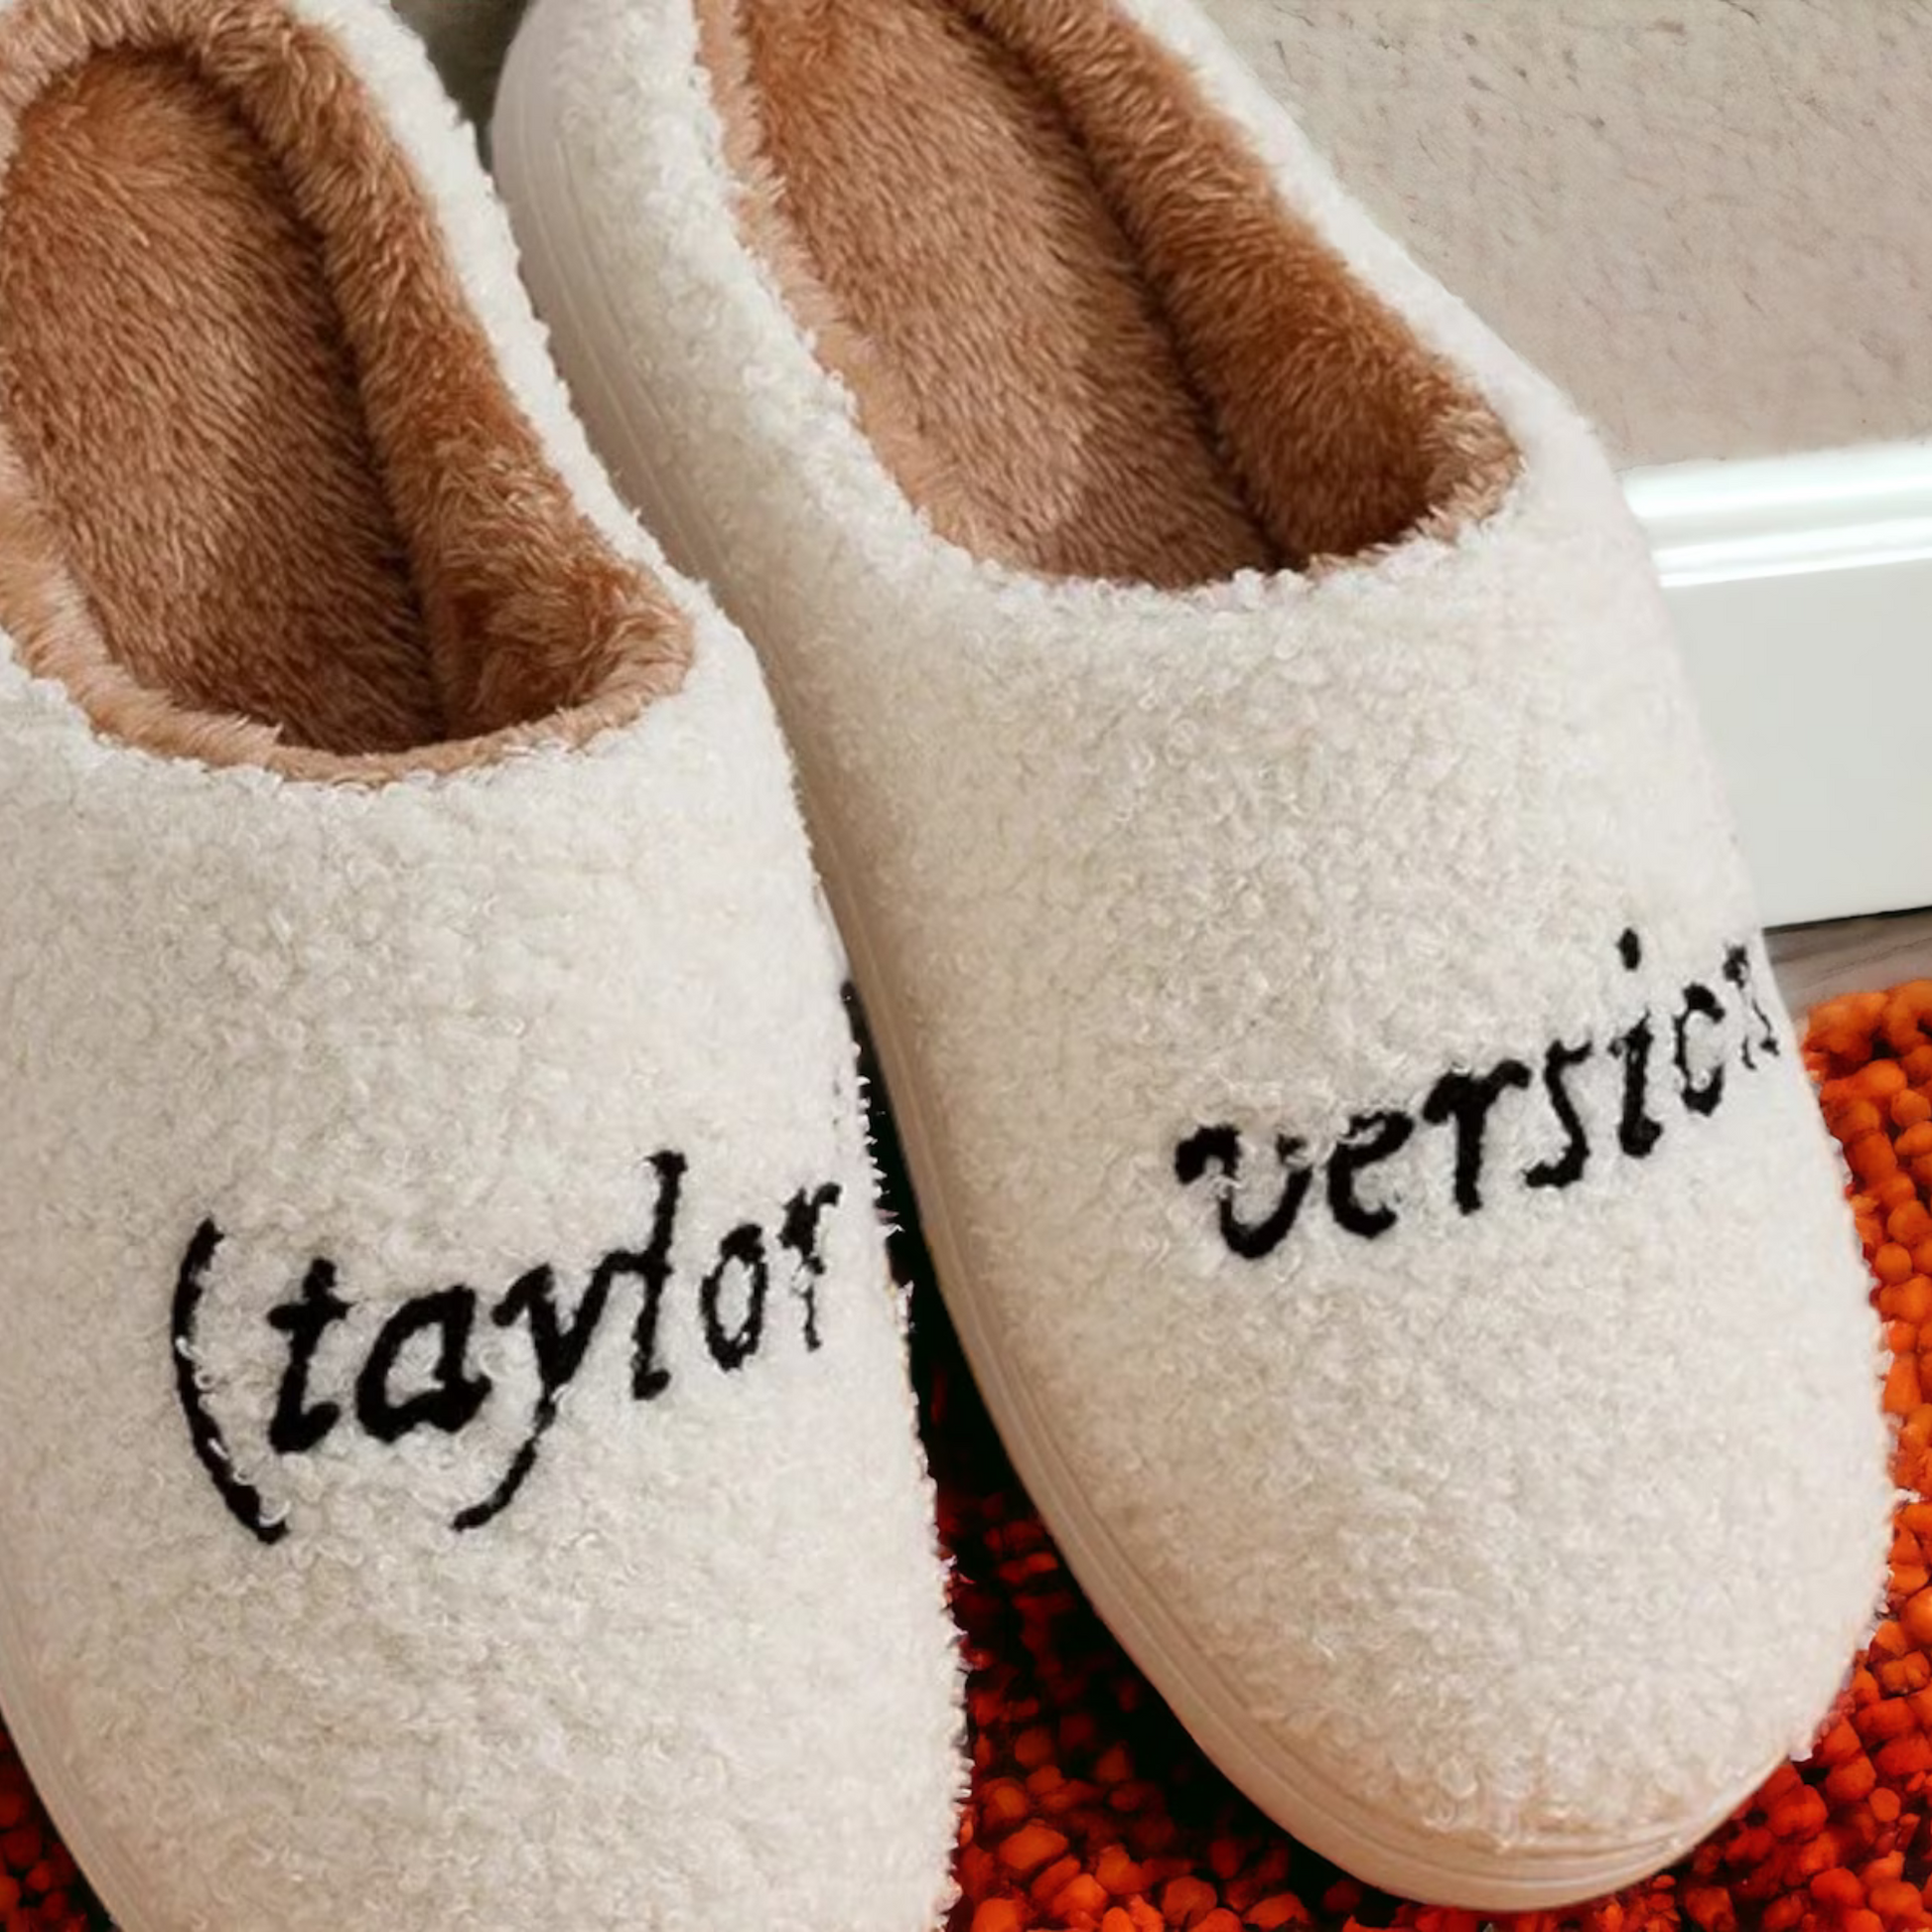 Taylors Version Slippers with black text